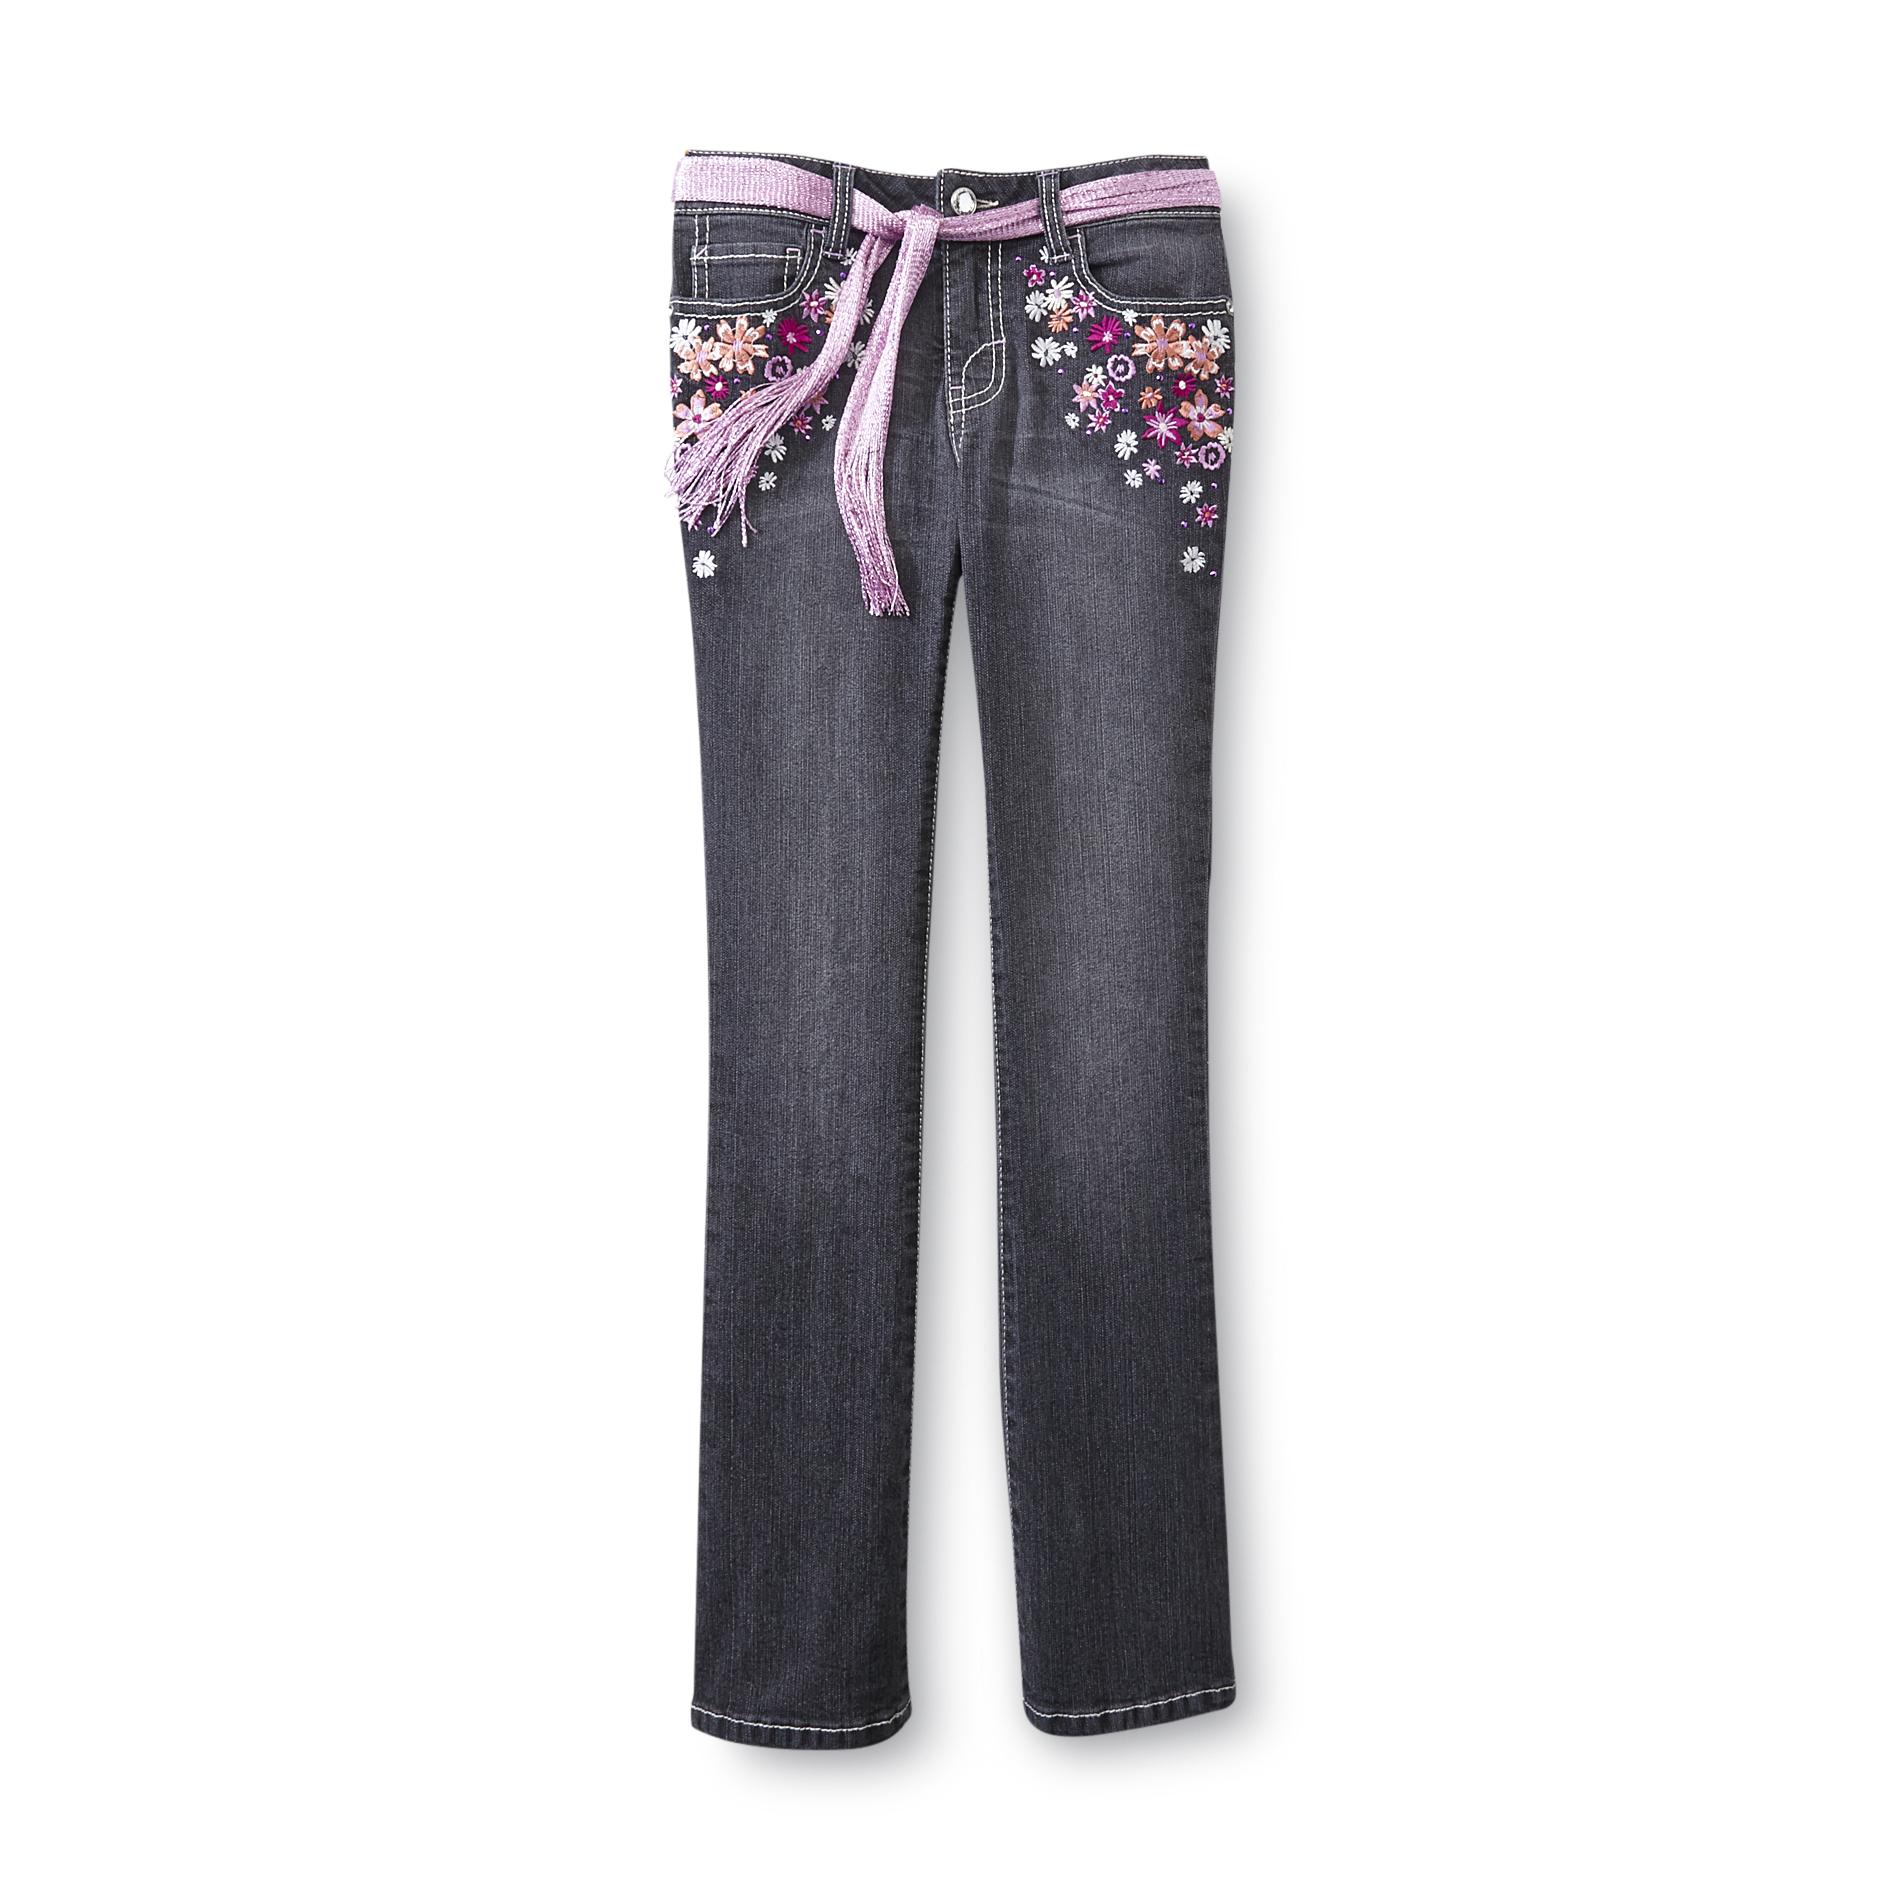 Route 66 Girl's Bootcut Skinny Jeans & Belt - Embroidered